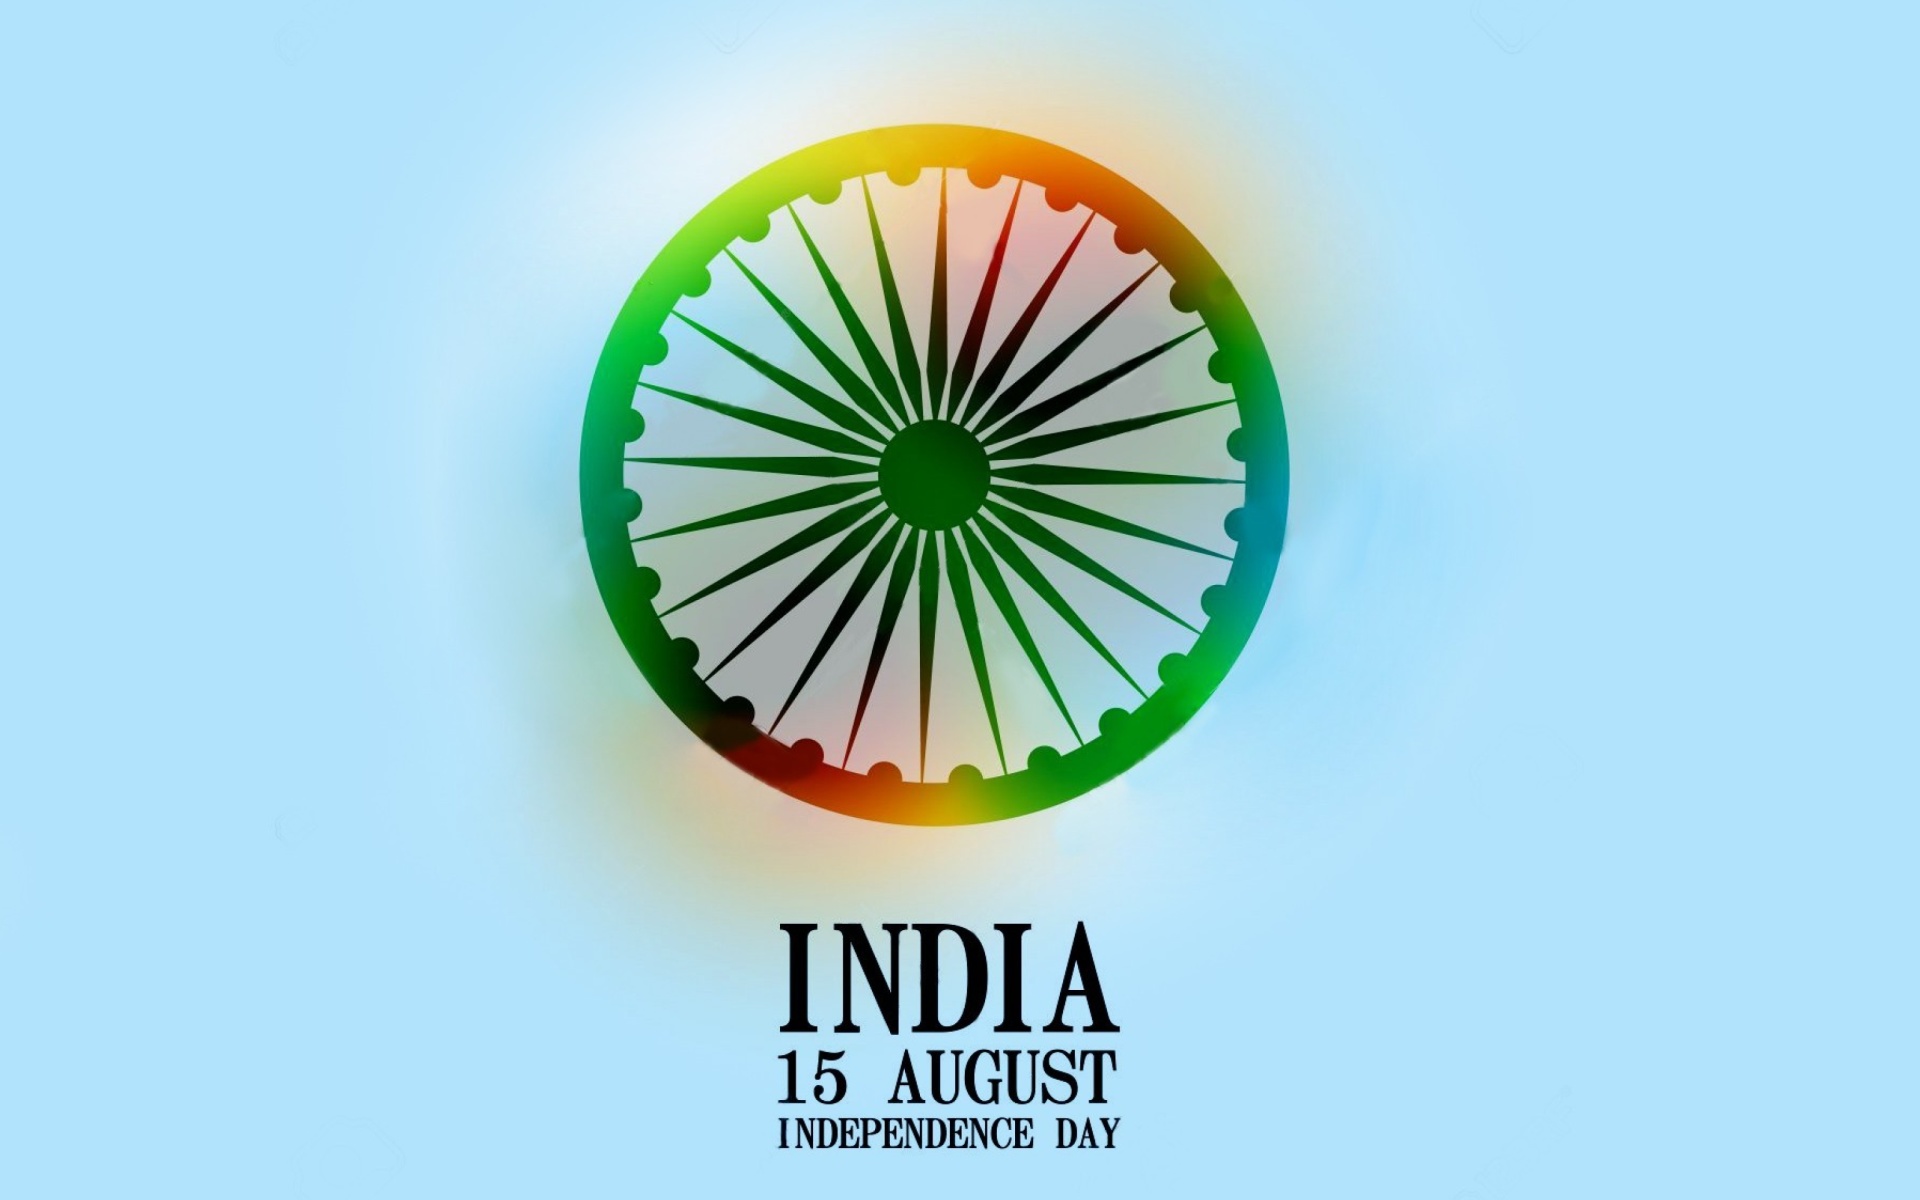 India Independence Day 15 August screenshot #1 1920x1200